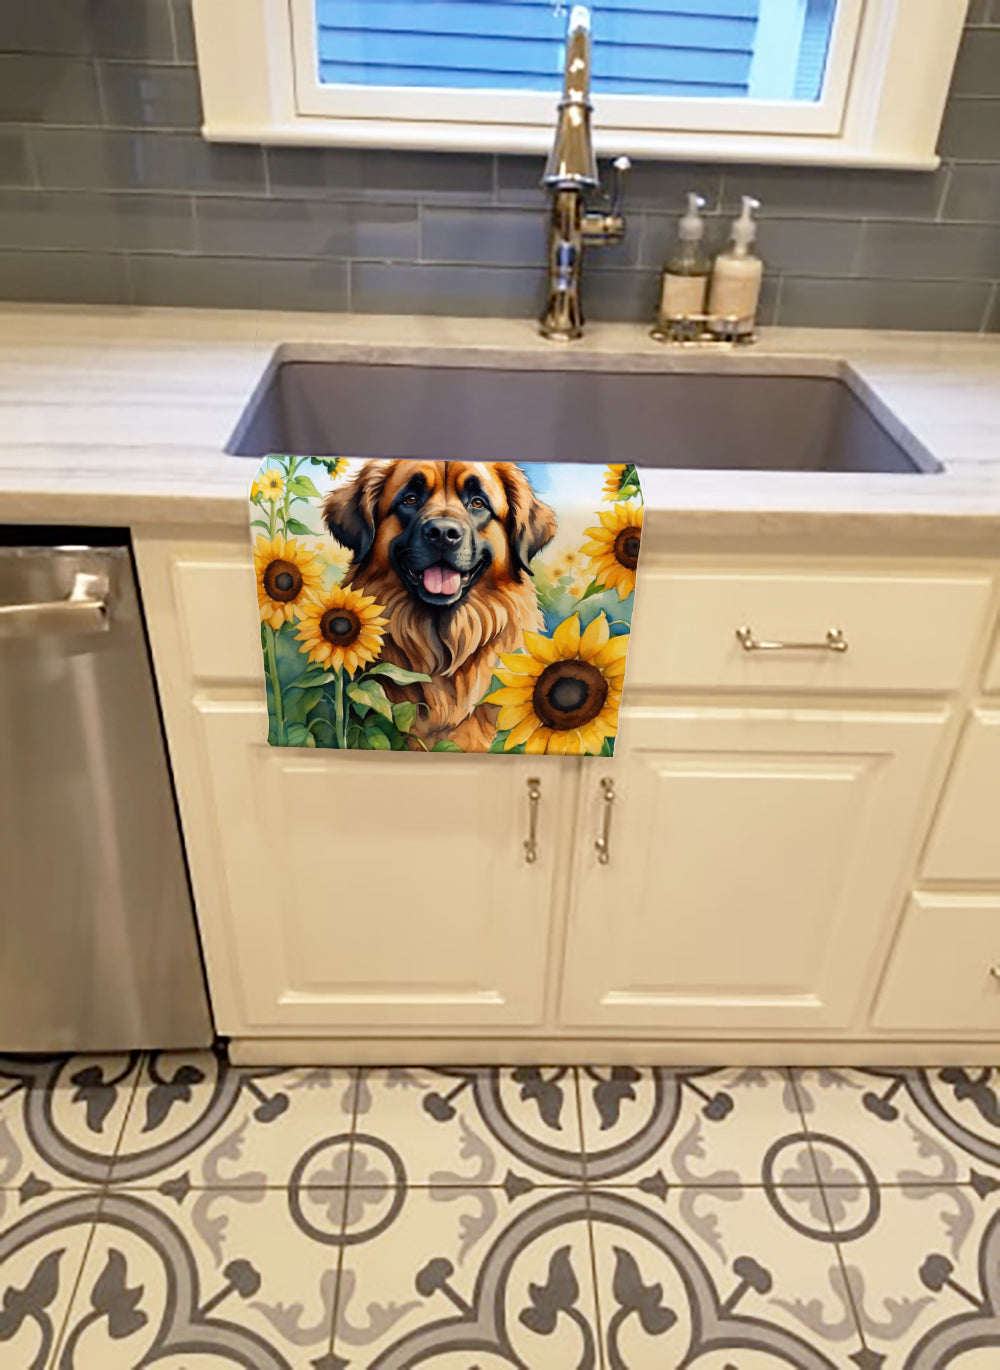 Buy this Leonberger in Sunflowers Kitchen Towel